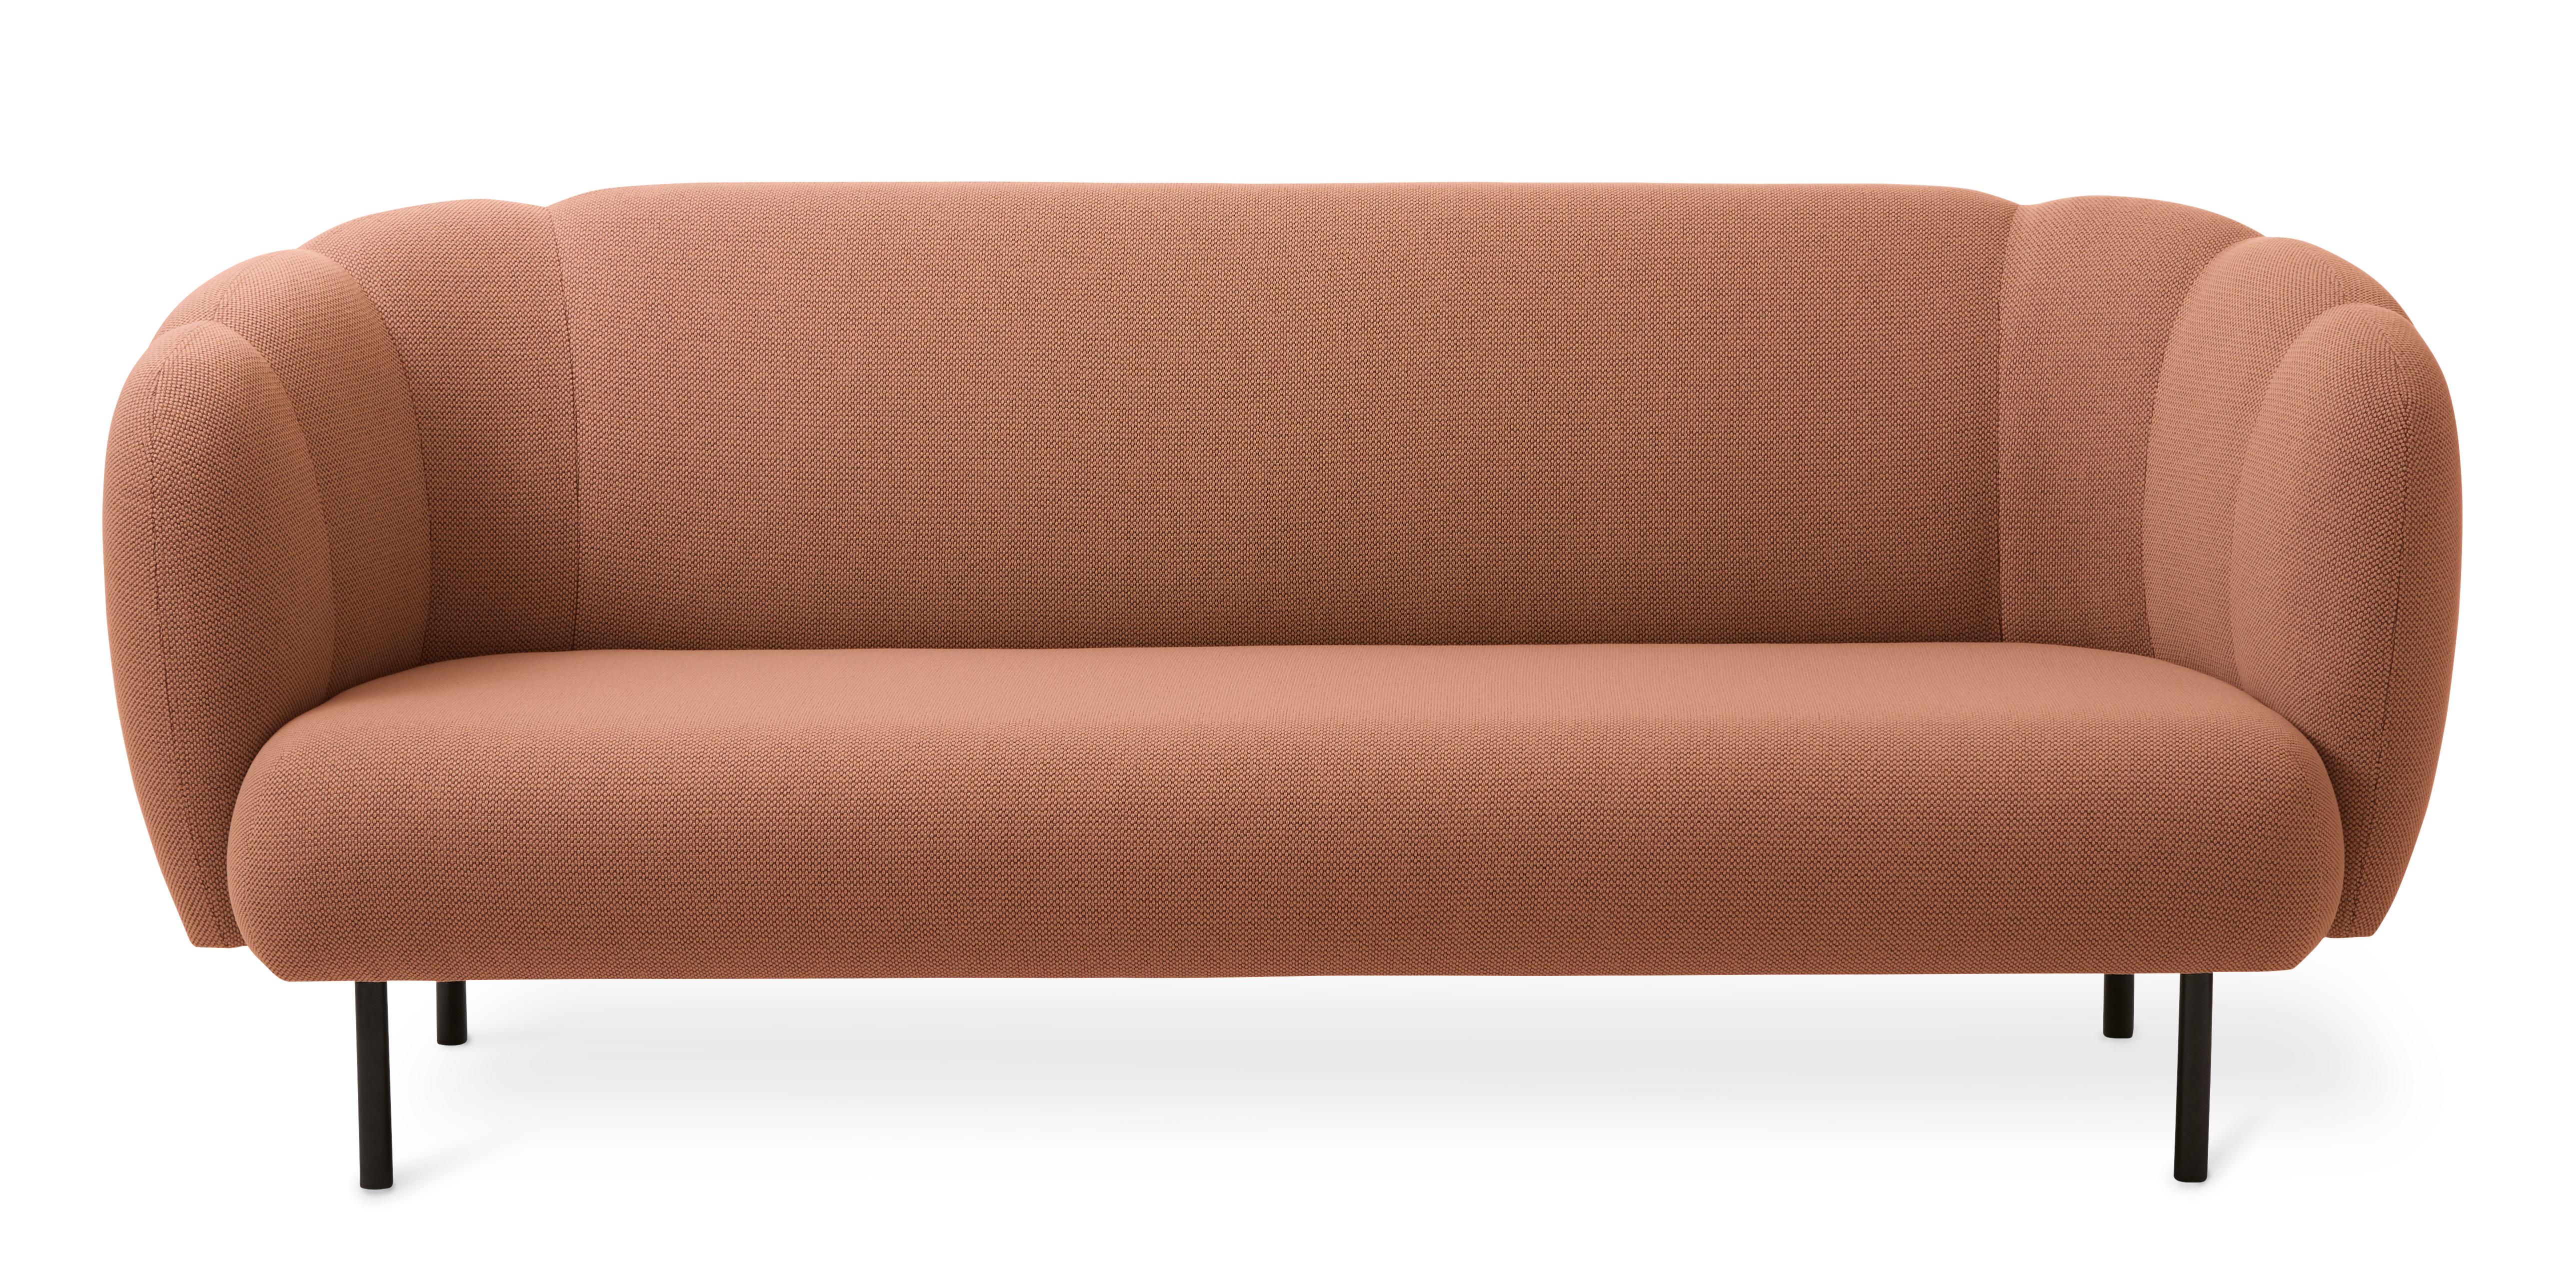 For Sale: Pink (Merit 035) Cape 3-Seat Stitch Sofa, by Charlotte Høncke from Warm Nordic